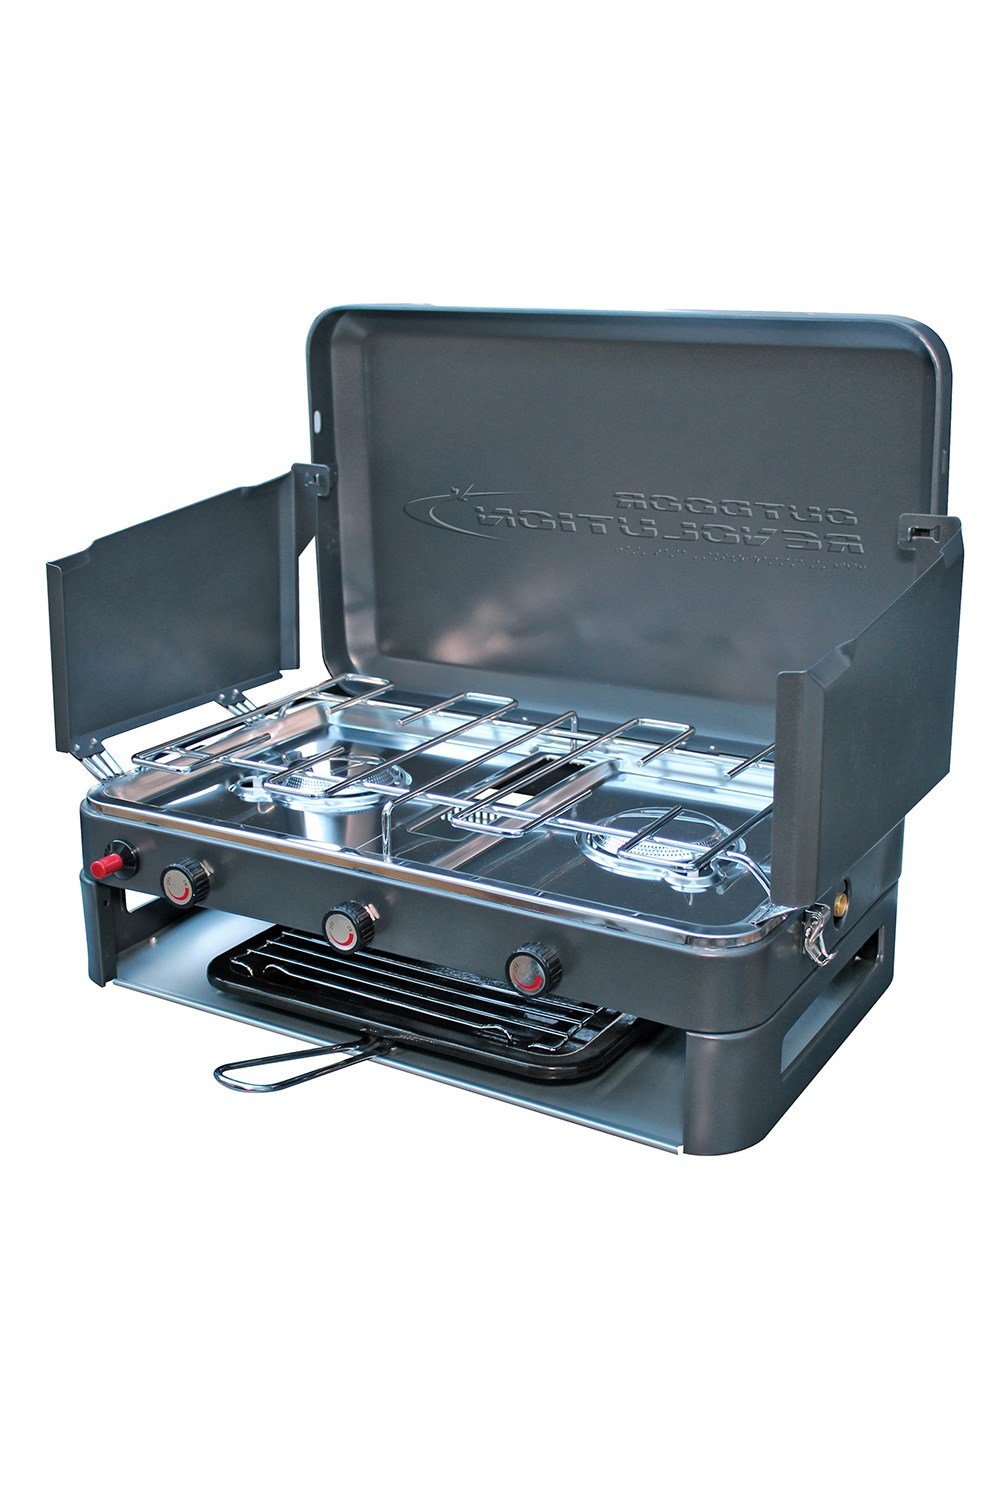 Twin Burner Gas StoveandGrill -